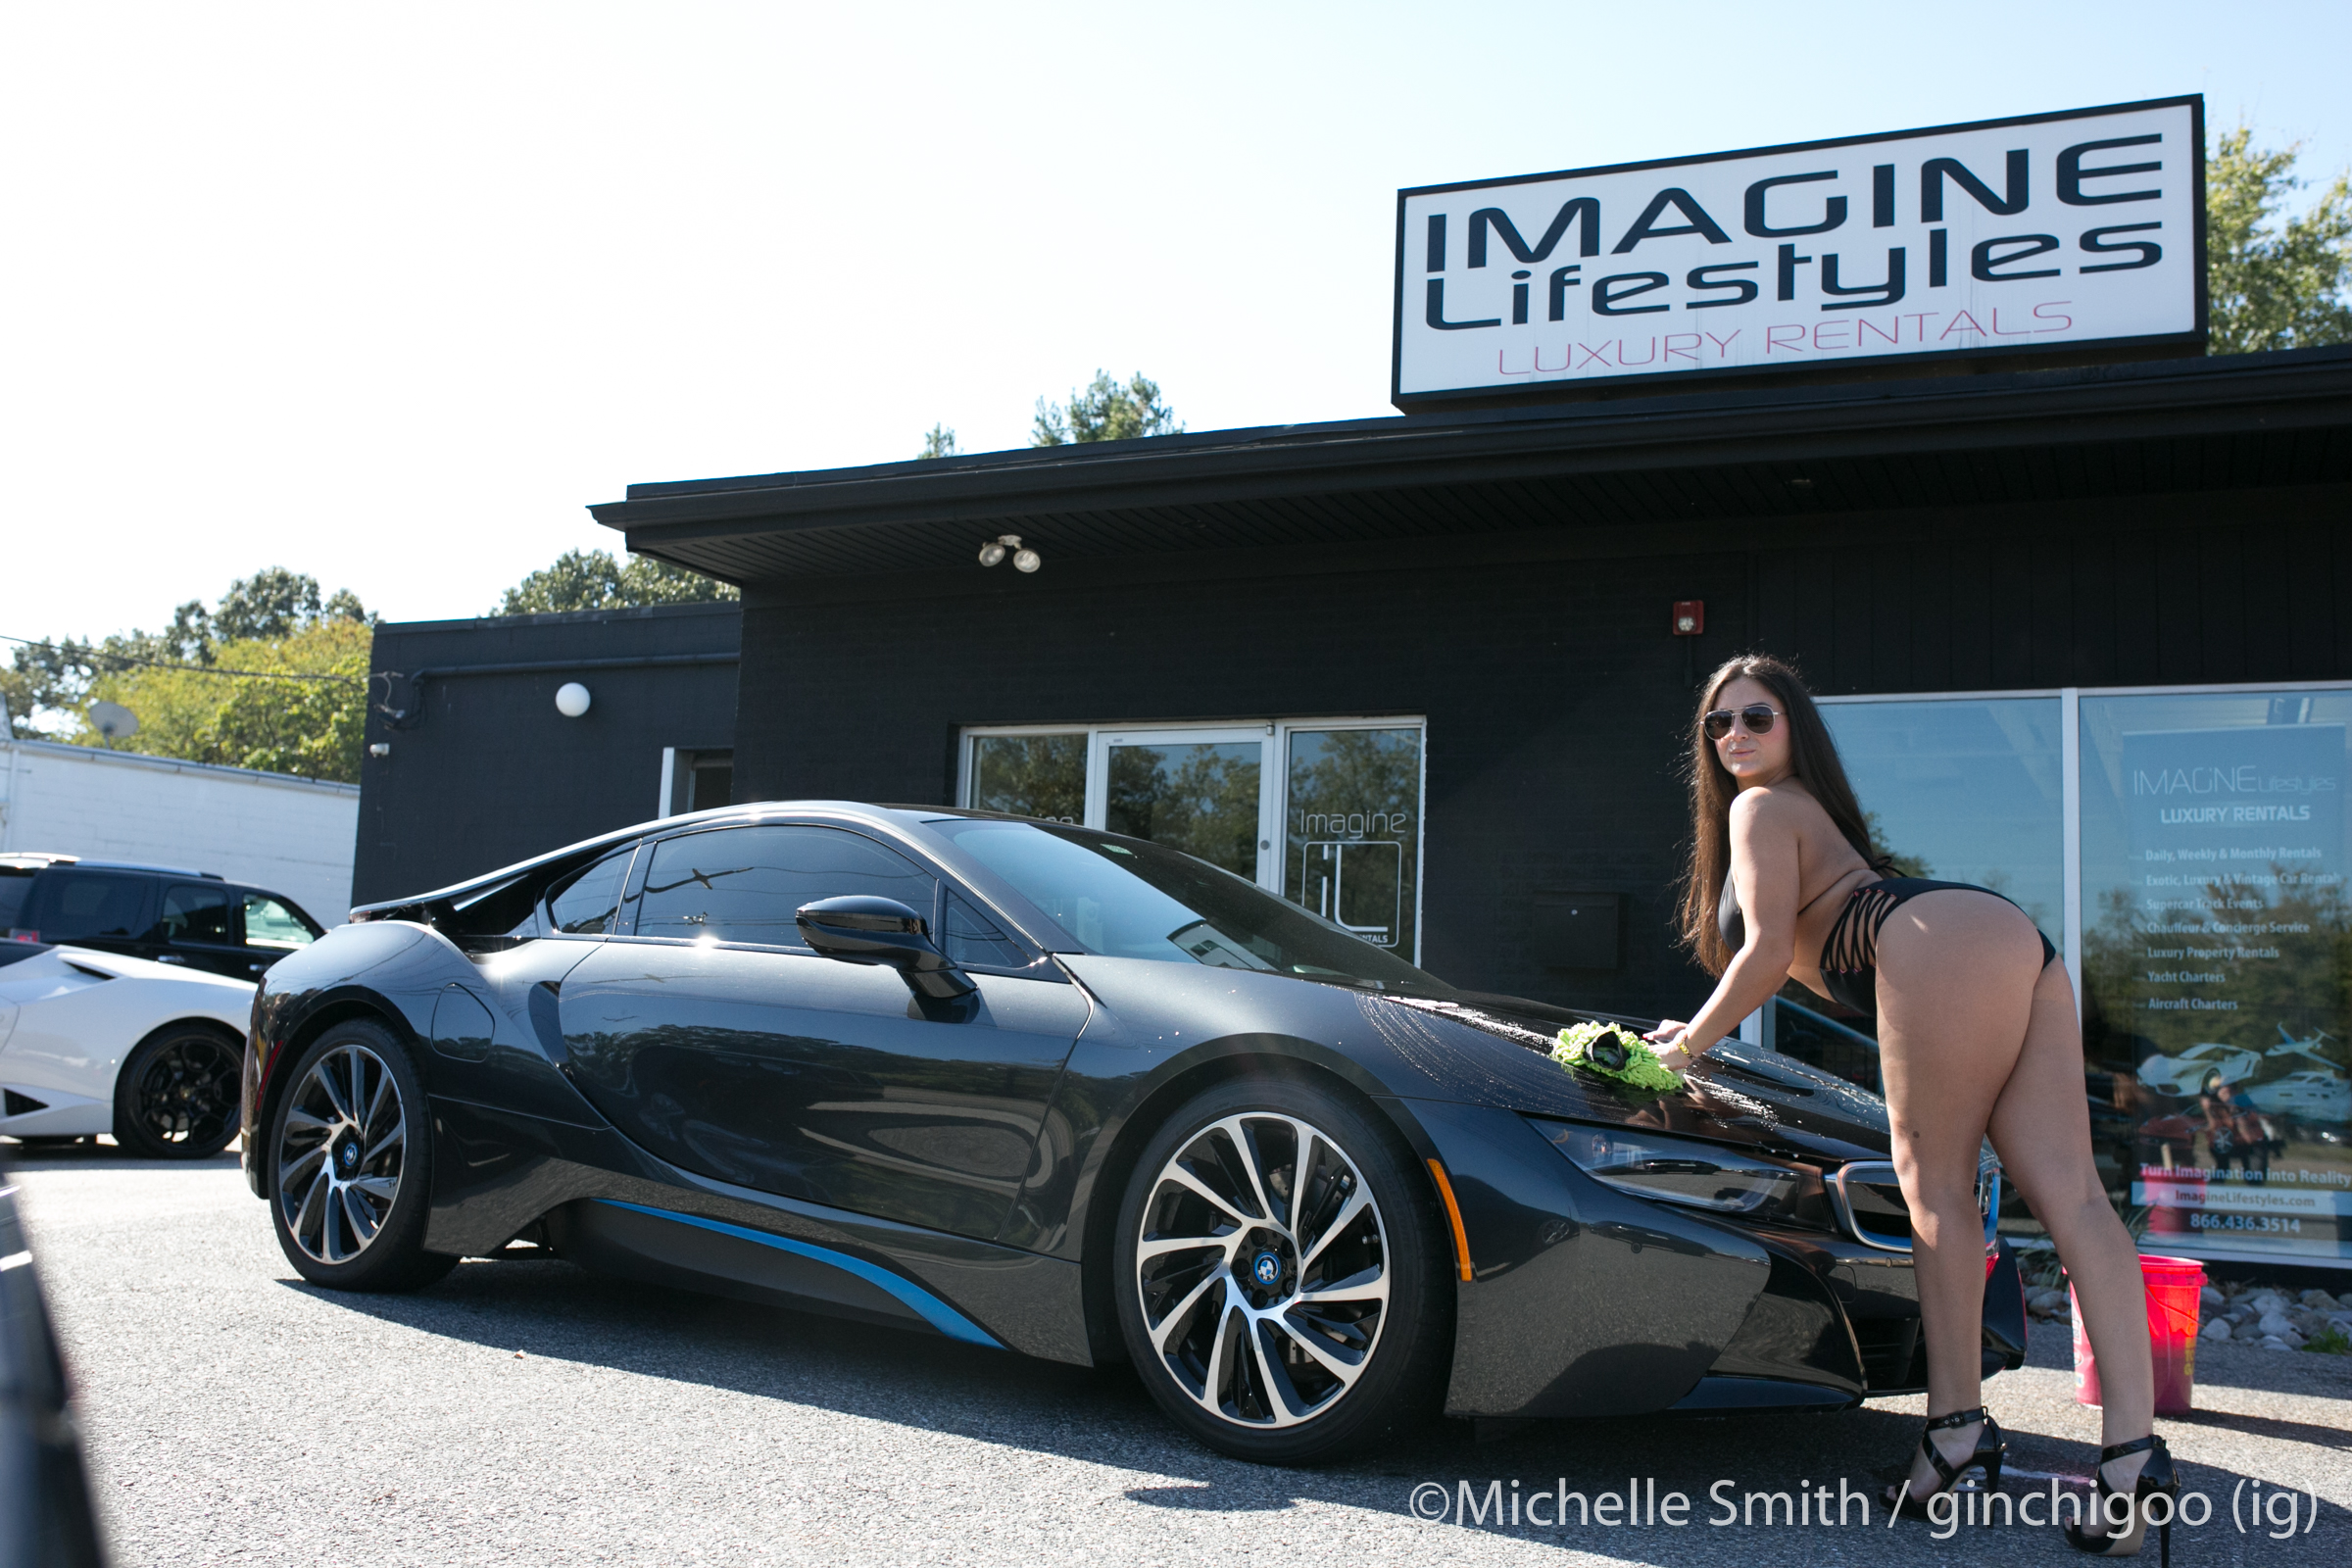 Imagine cars. Hot cars & hot girls Crazy Custom Tuning Exotics and Supercars at hottest Miami Dub show Miami beachкартинки. Best exotic car for Tall Drivers.